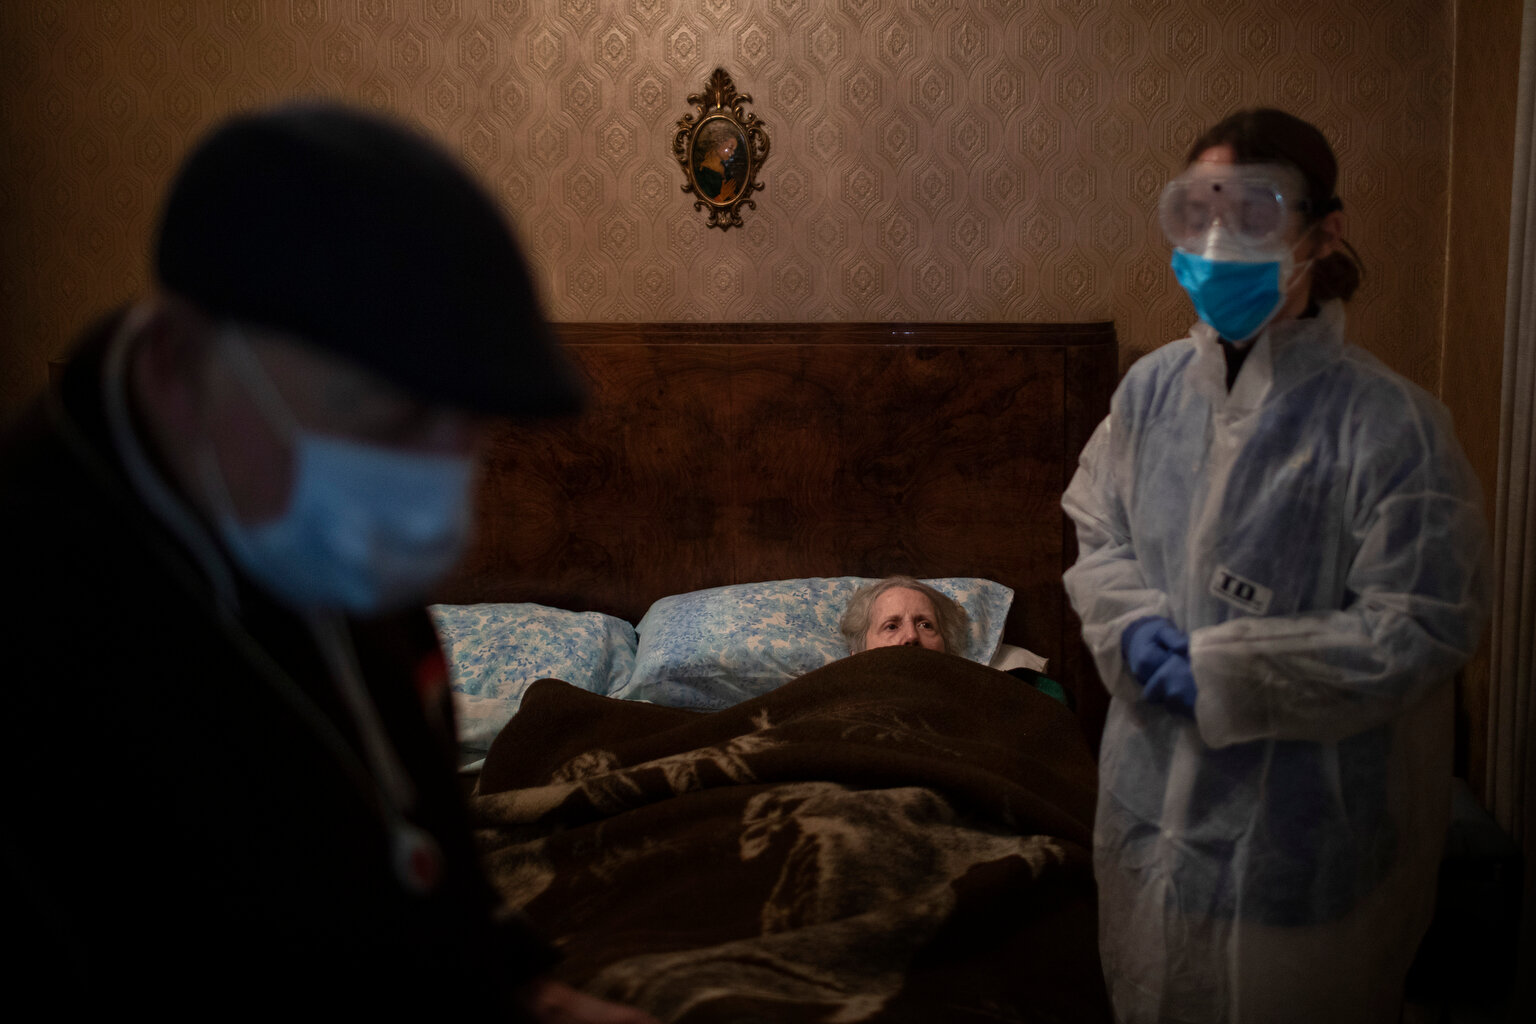  Josefa Ribas, 86, who is bedridden, looks at nurse Alba Rodriguez as Ribas’ husband, Jose Marcos, 89, stands by in their home in Barcelona, Spain, March 30, 2020, during the coronavirus outbreak. Ribas suffers from dementia, and Marcos fears for the